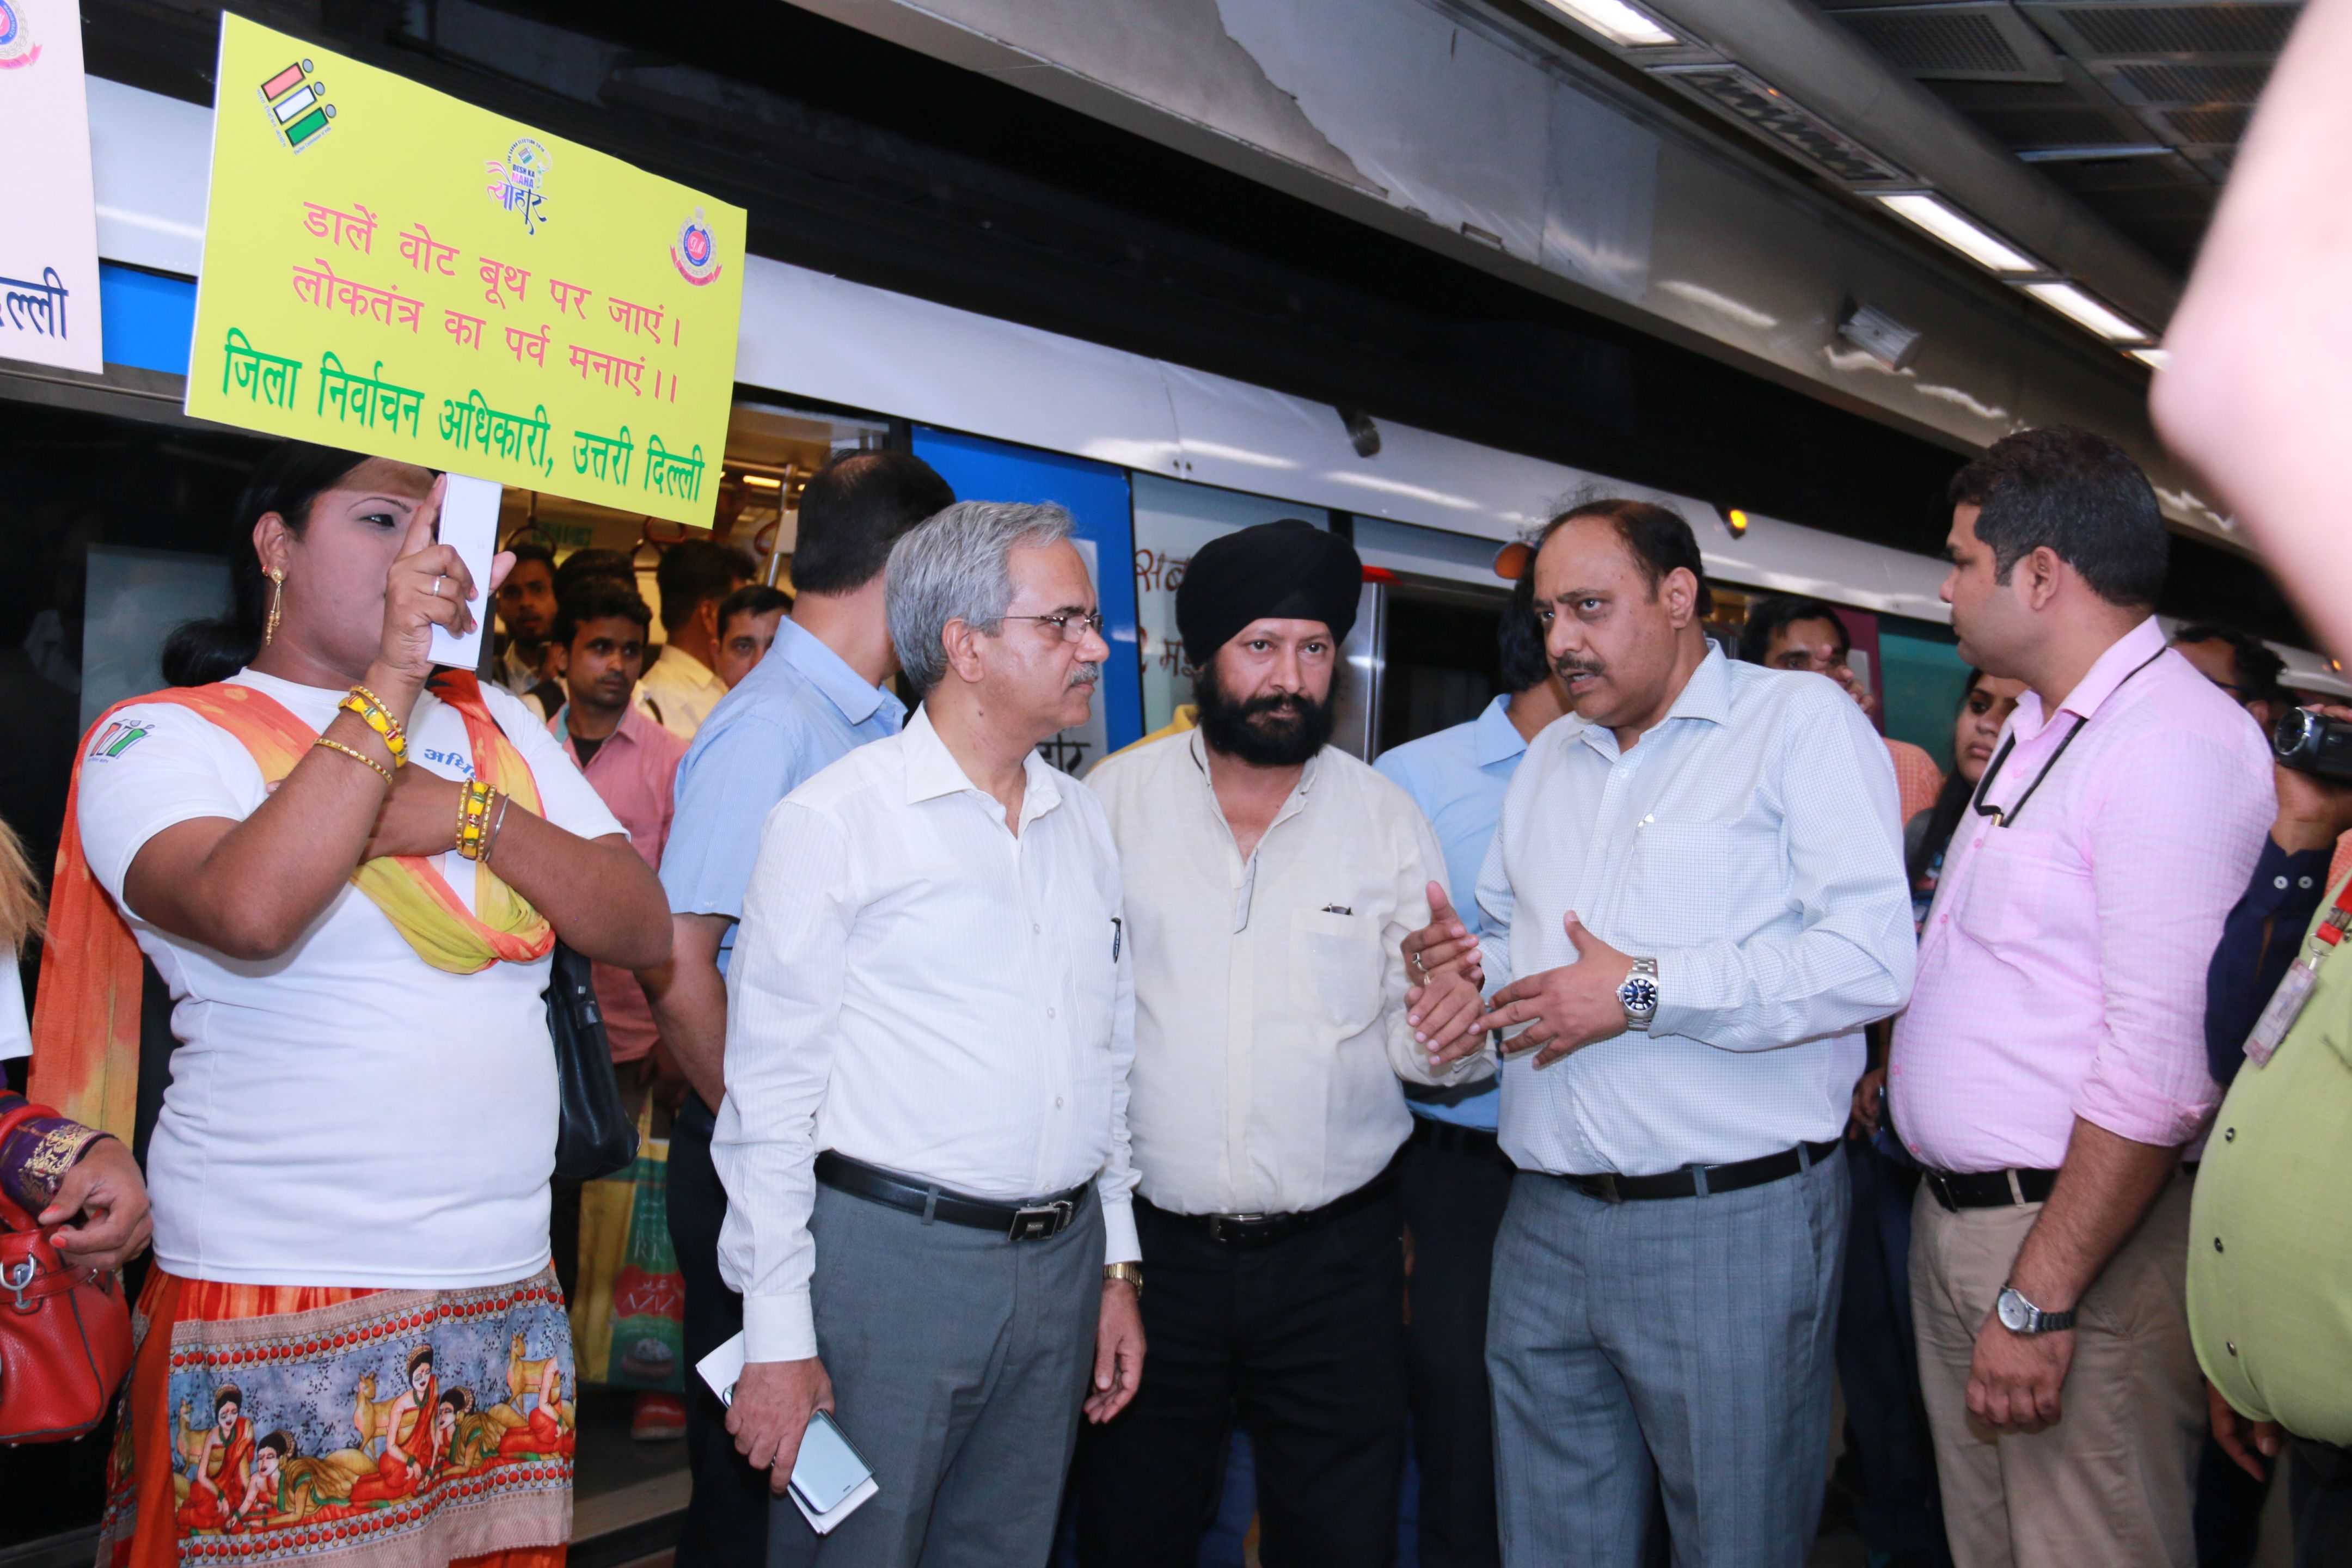 Flag off Ceremony of Yellow Line Metro Station on 24.04.2019